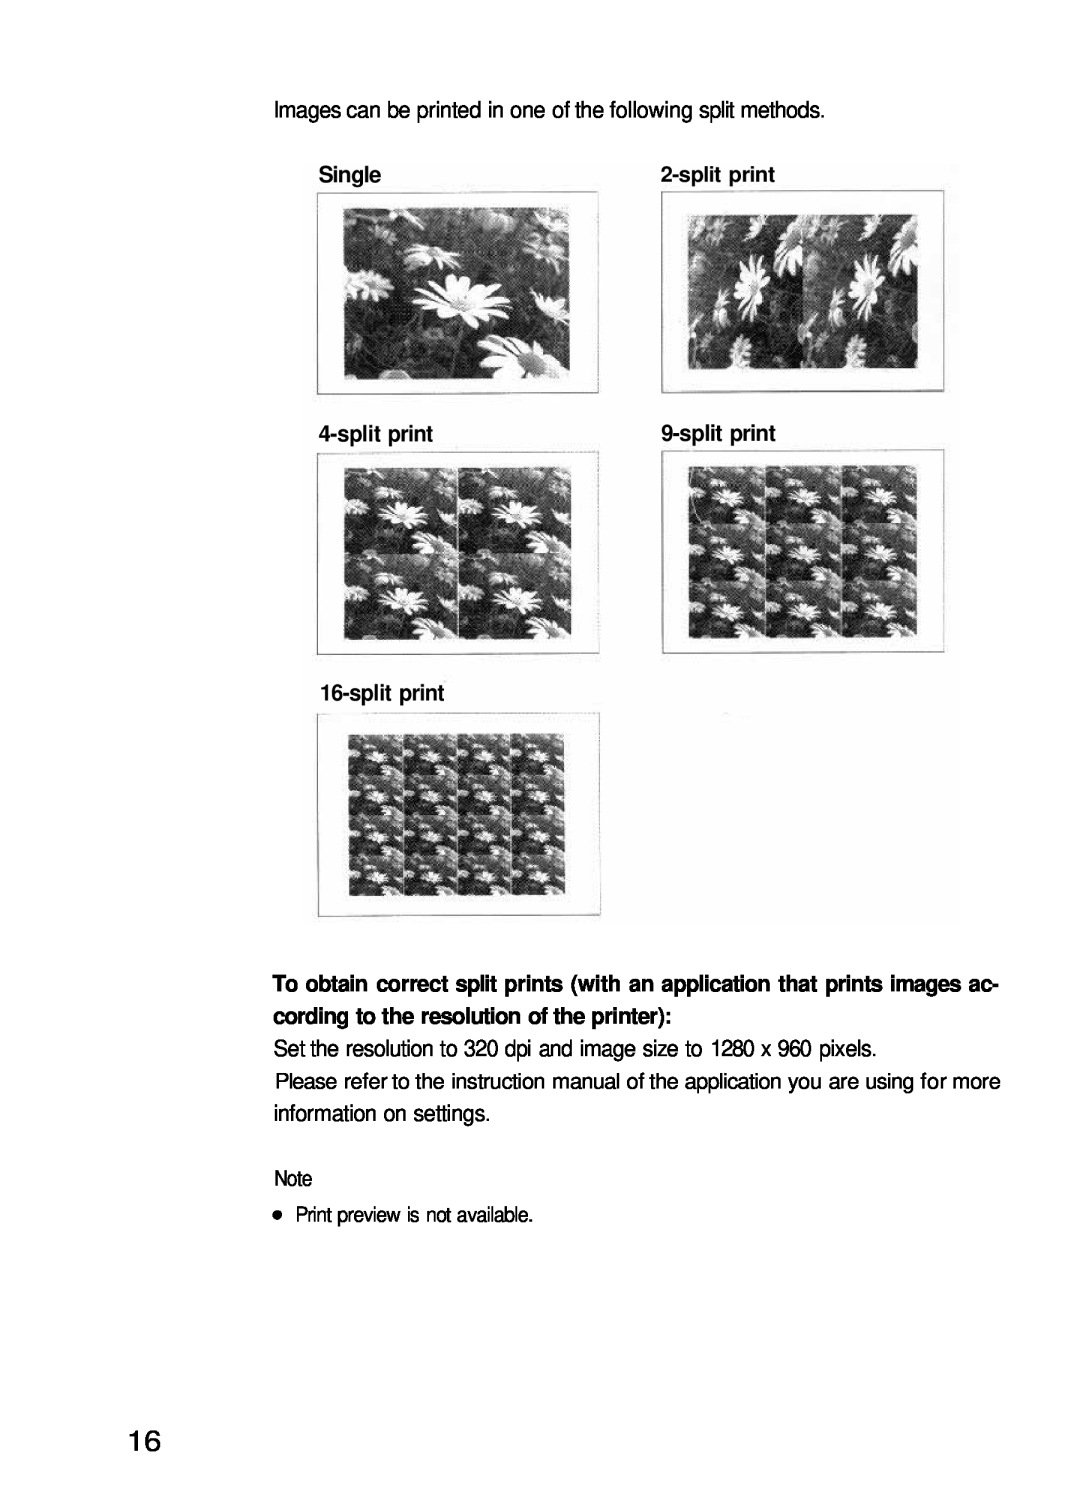 Olympus P-200 Images can be printed in one of the following split methods, Single, split print, information on settings 